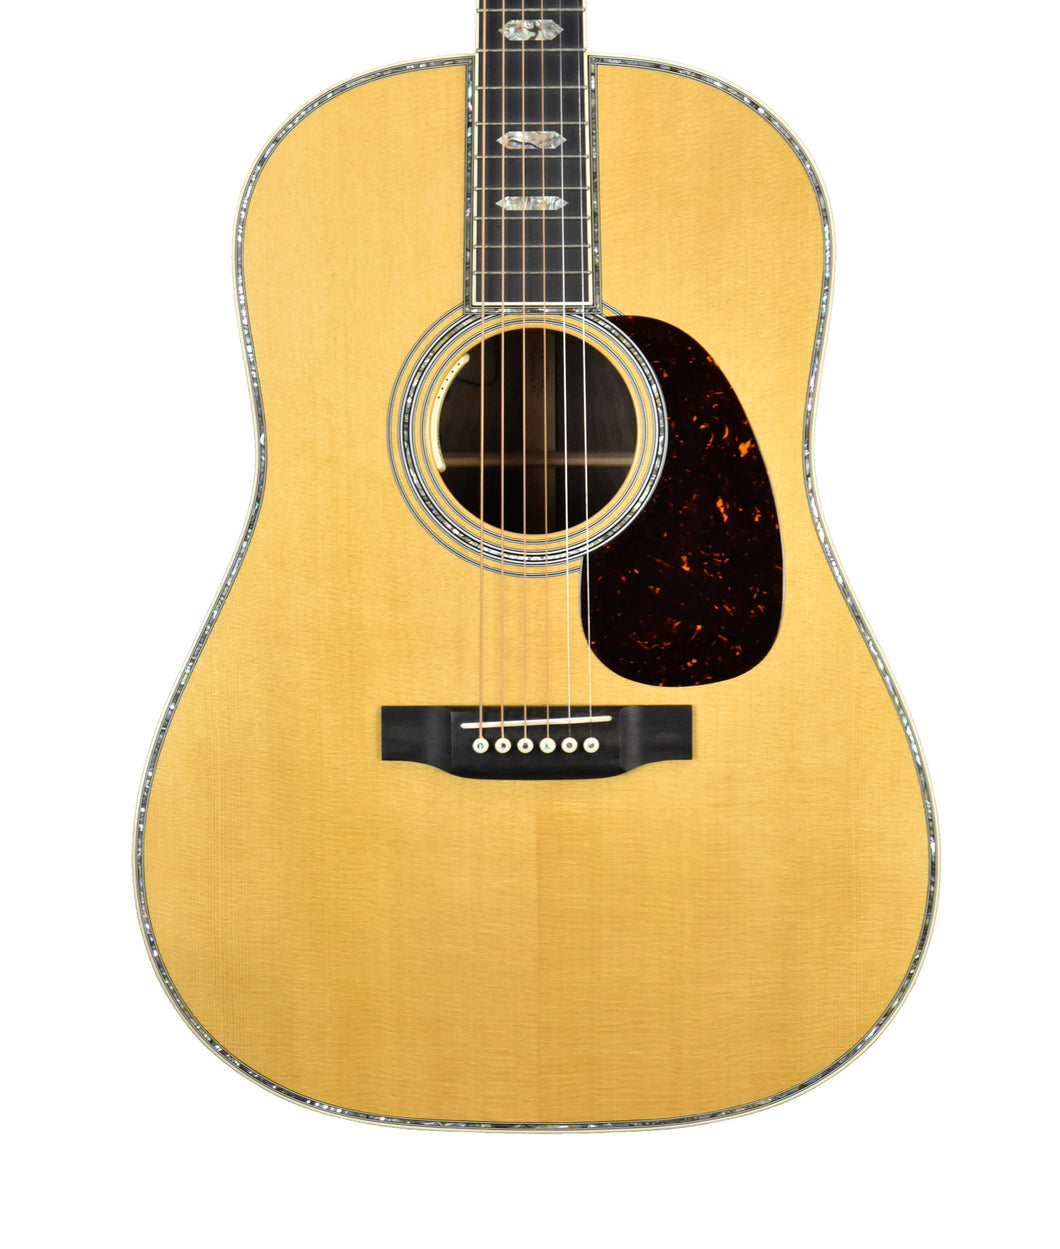 Used 2016 Martin Custom Shop D-45 12-Fret Acoustic-Electric Guitar in Natural 2054106 - The Music Gallery